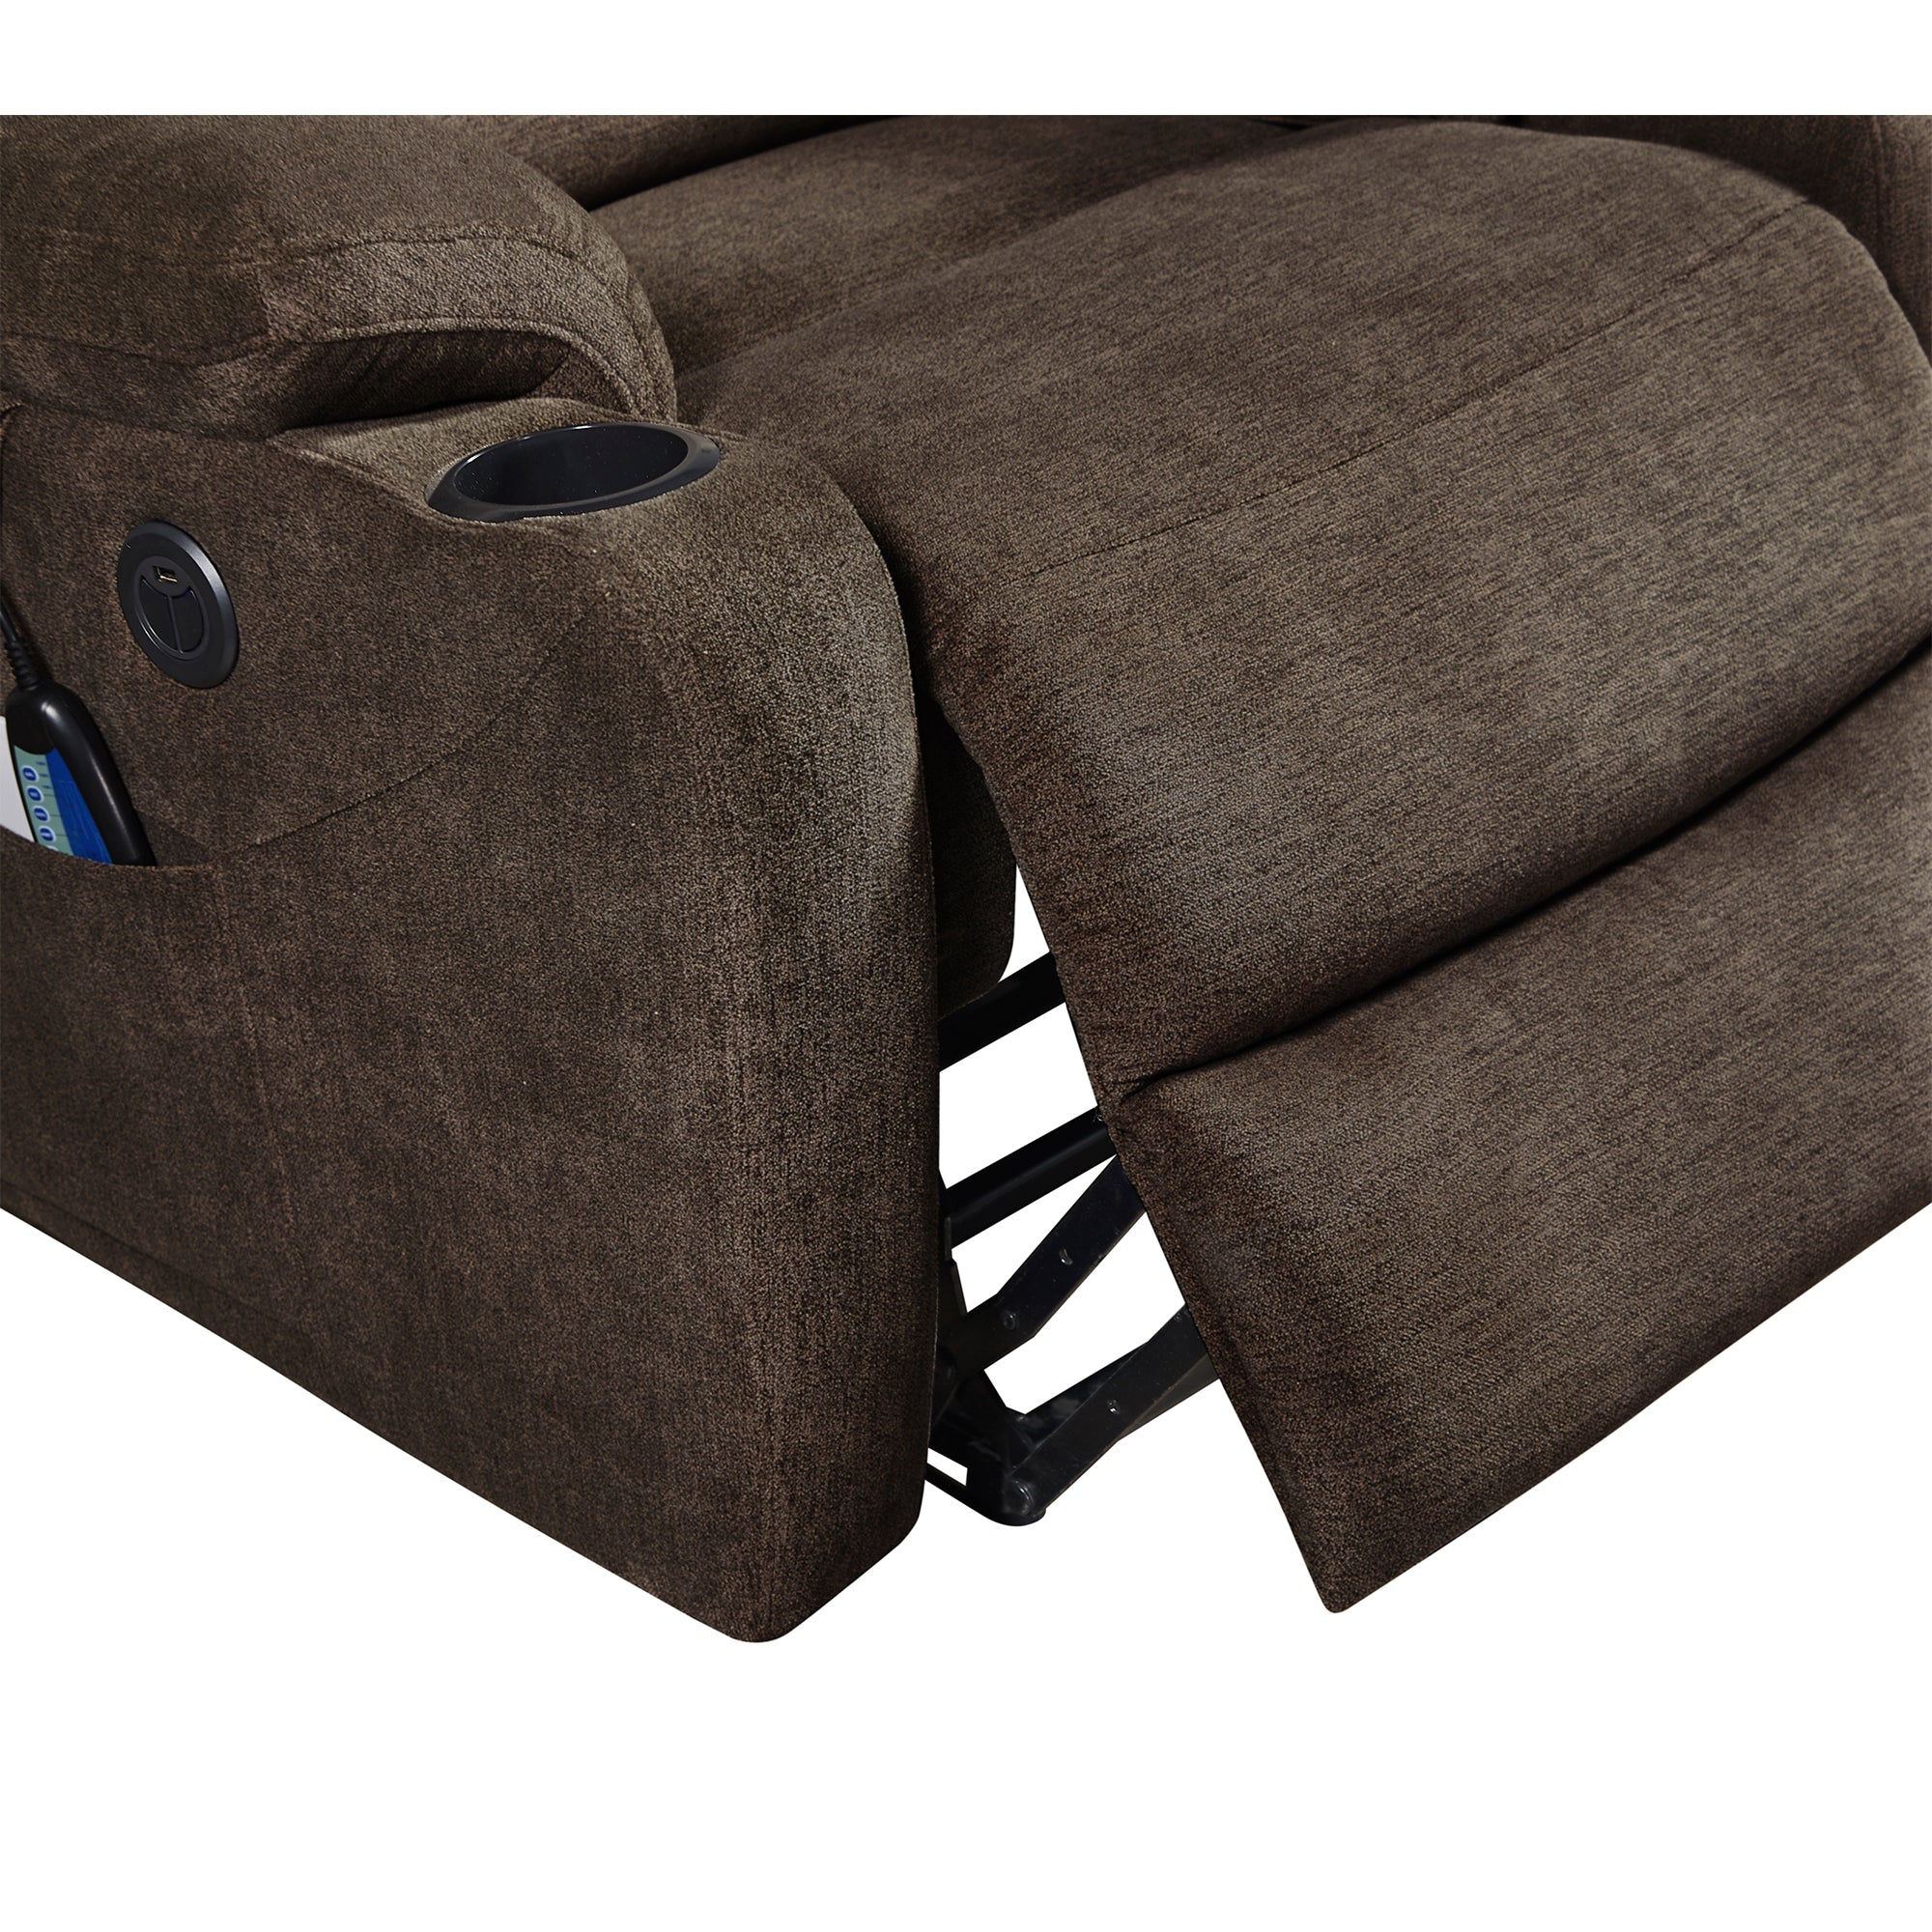 Liyasi Electric Power Recliner Relax Sofa Chair By: Alabama Beds